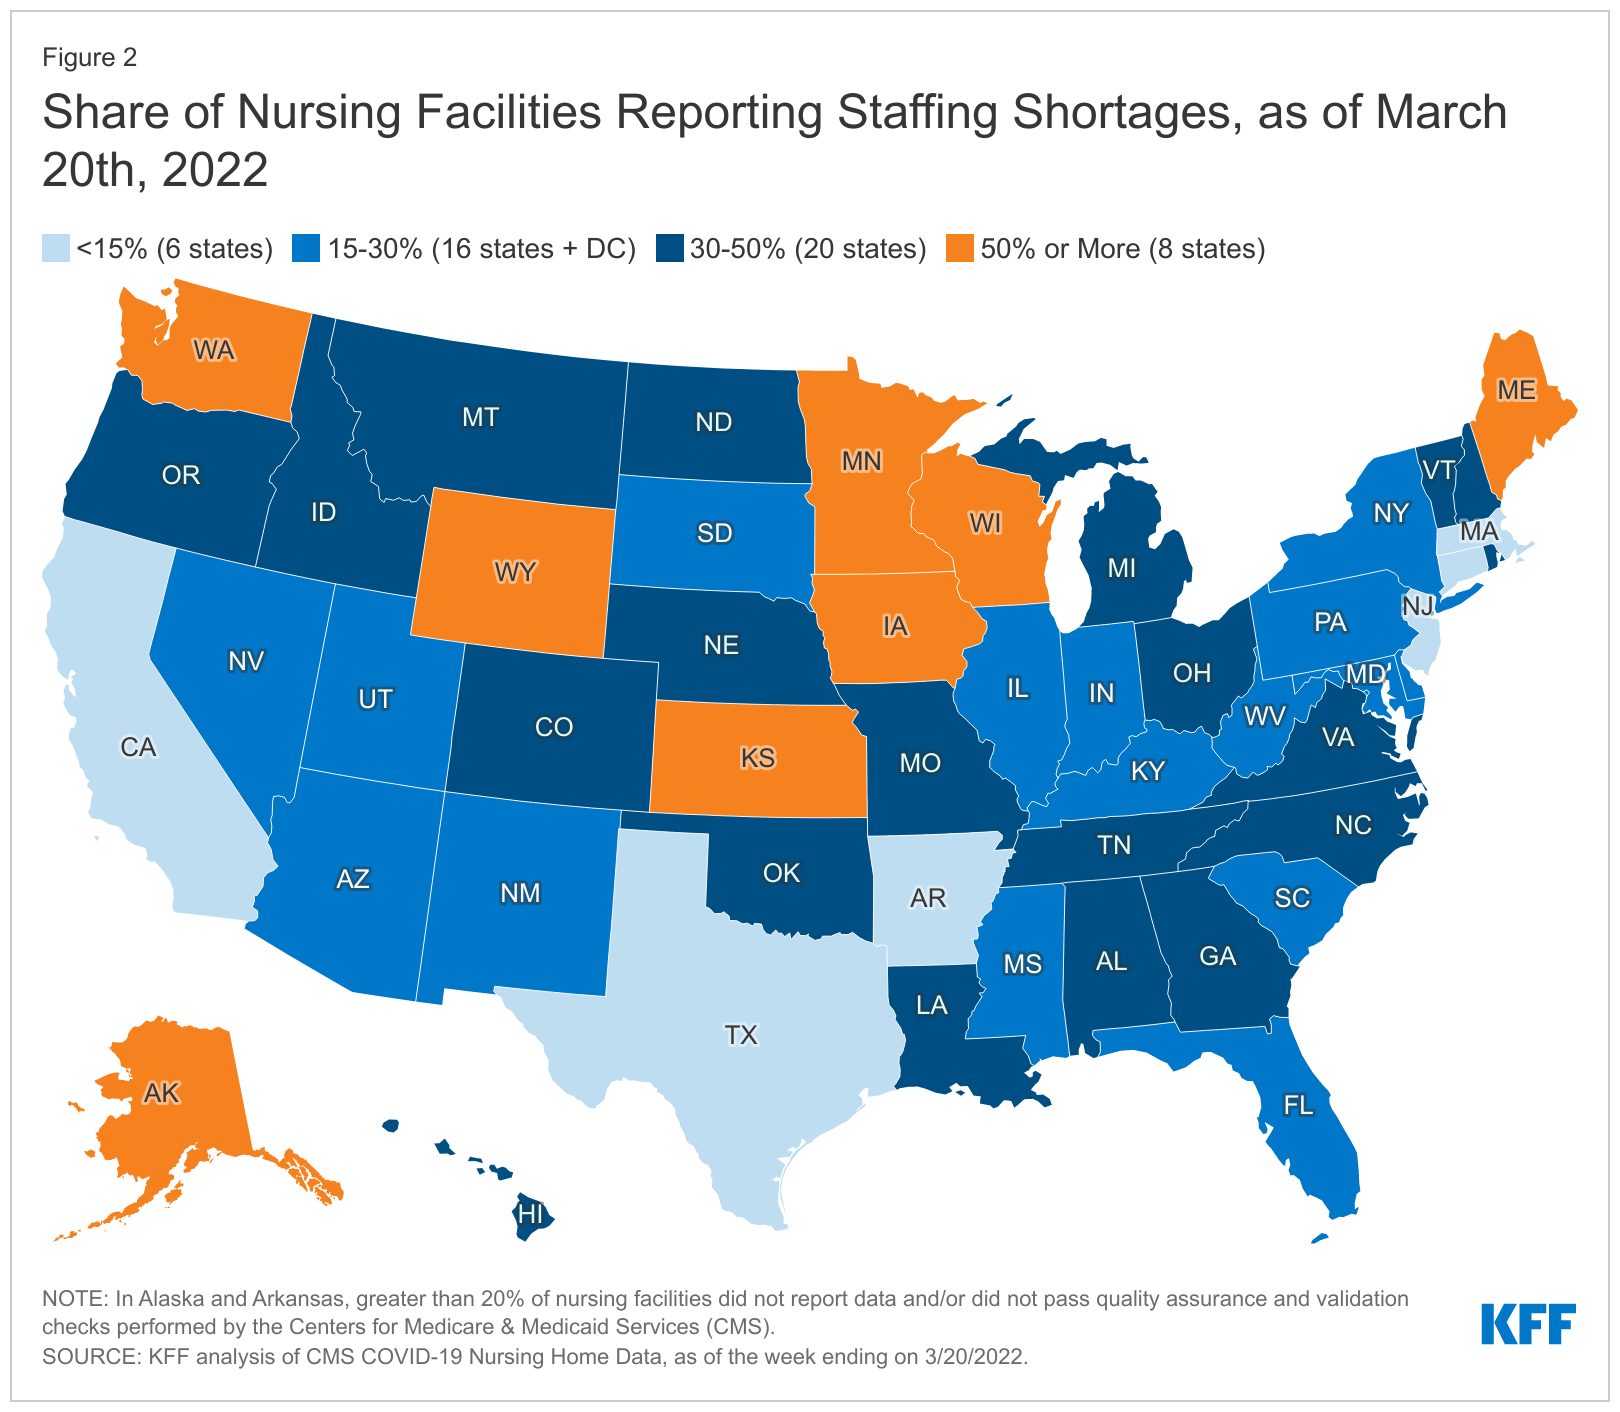 nursing-facility-staffing-shortages-during-the-covid-19-pandemic-kff